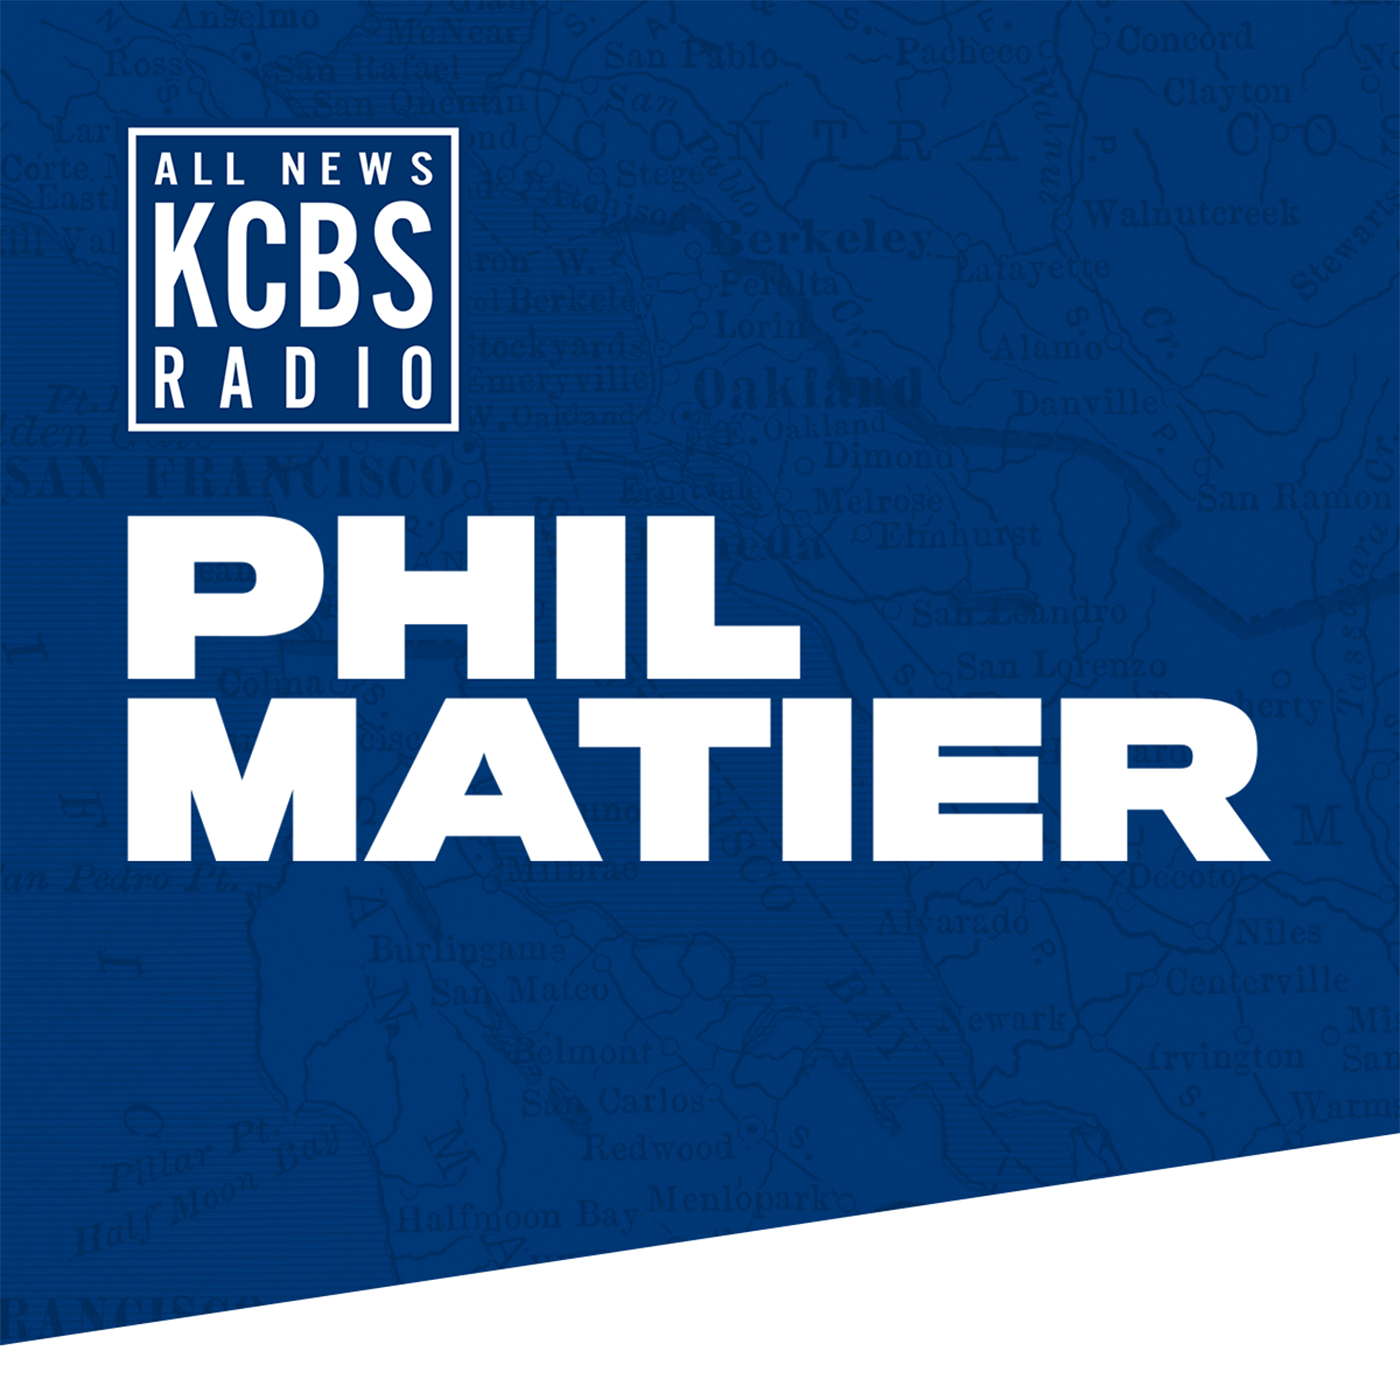 Phil Matier: The push and pull of law enforcement